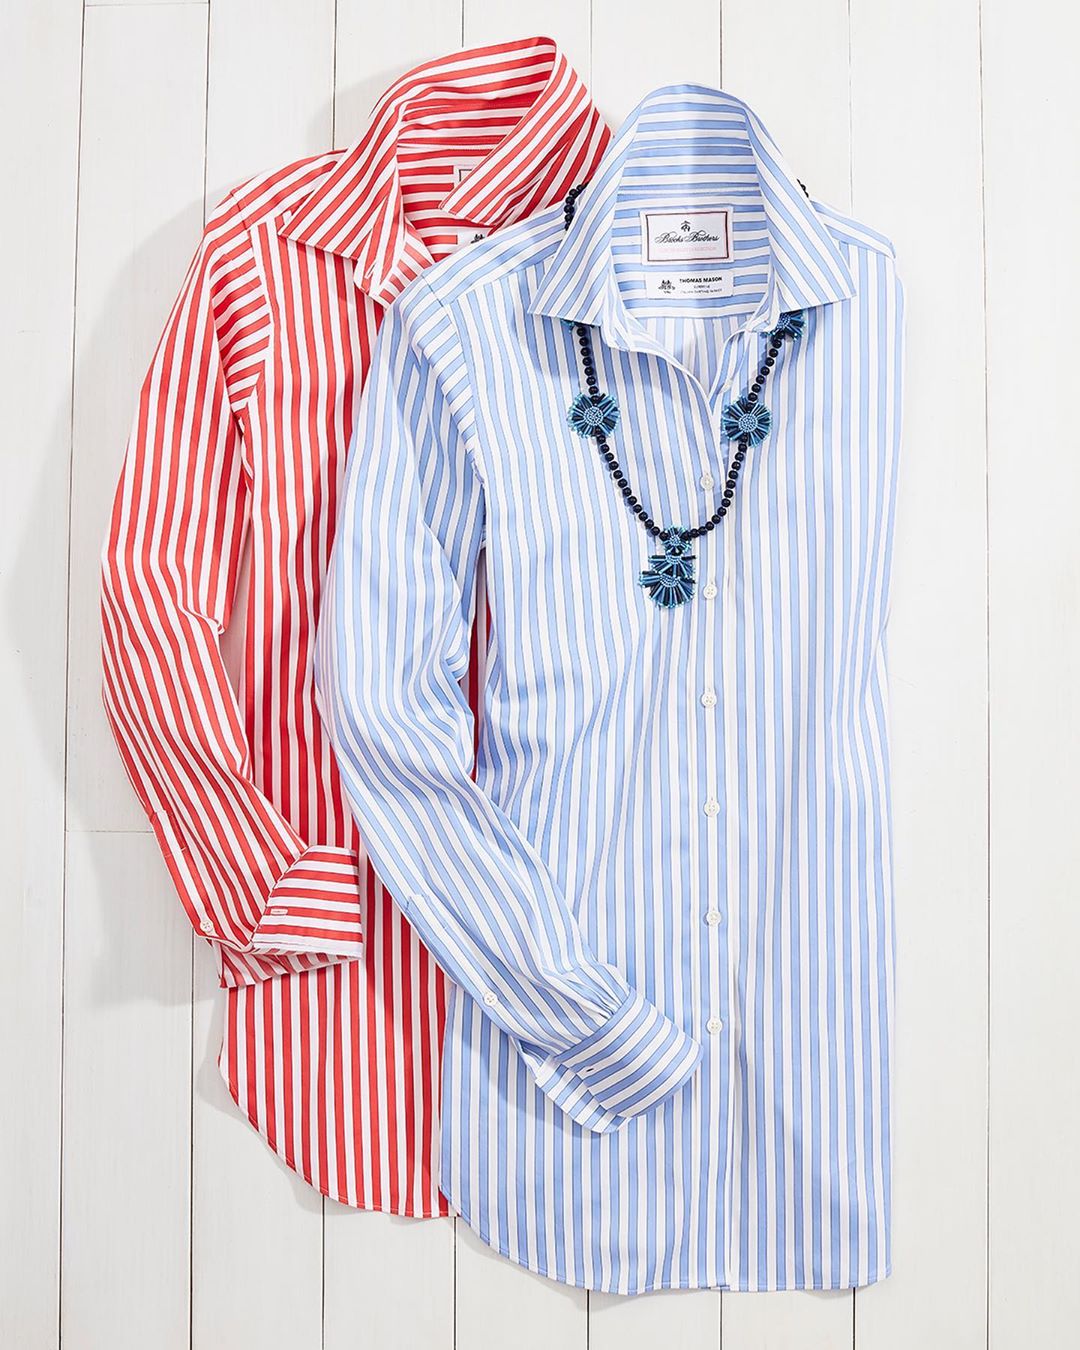 True story: in the early days of the pandemic, a loyal #BrooksBrothers customer wore the same short-sleeve button down f…